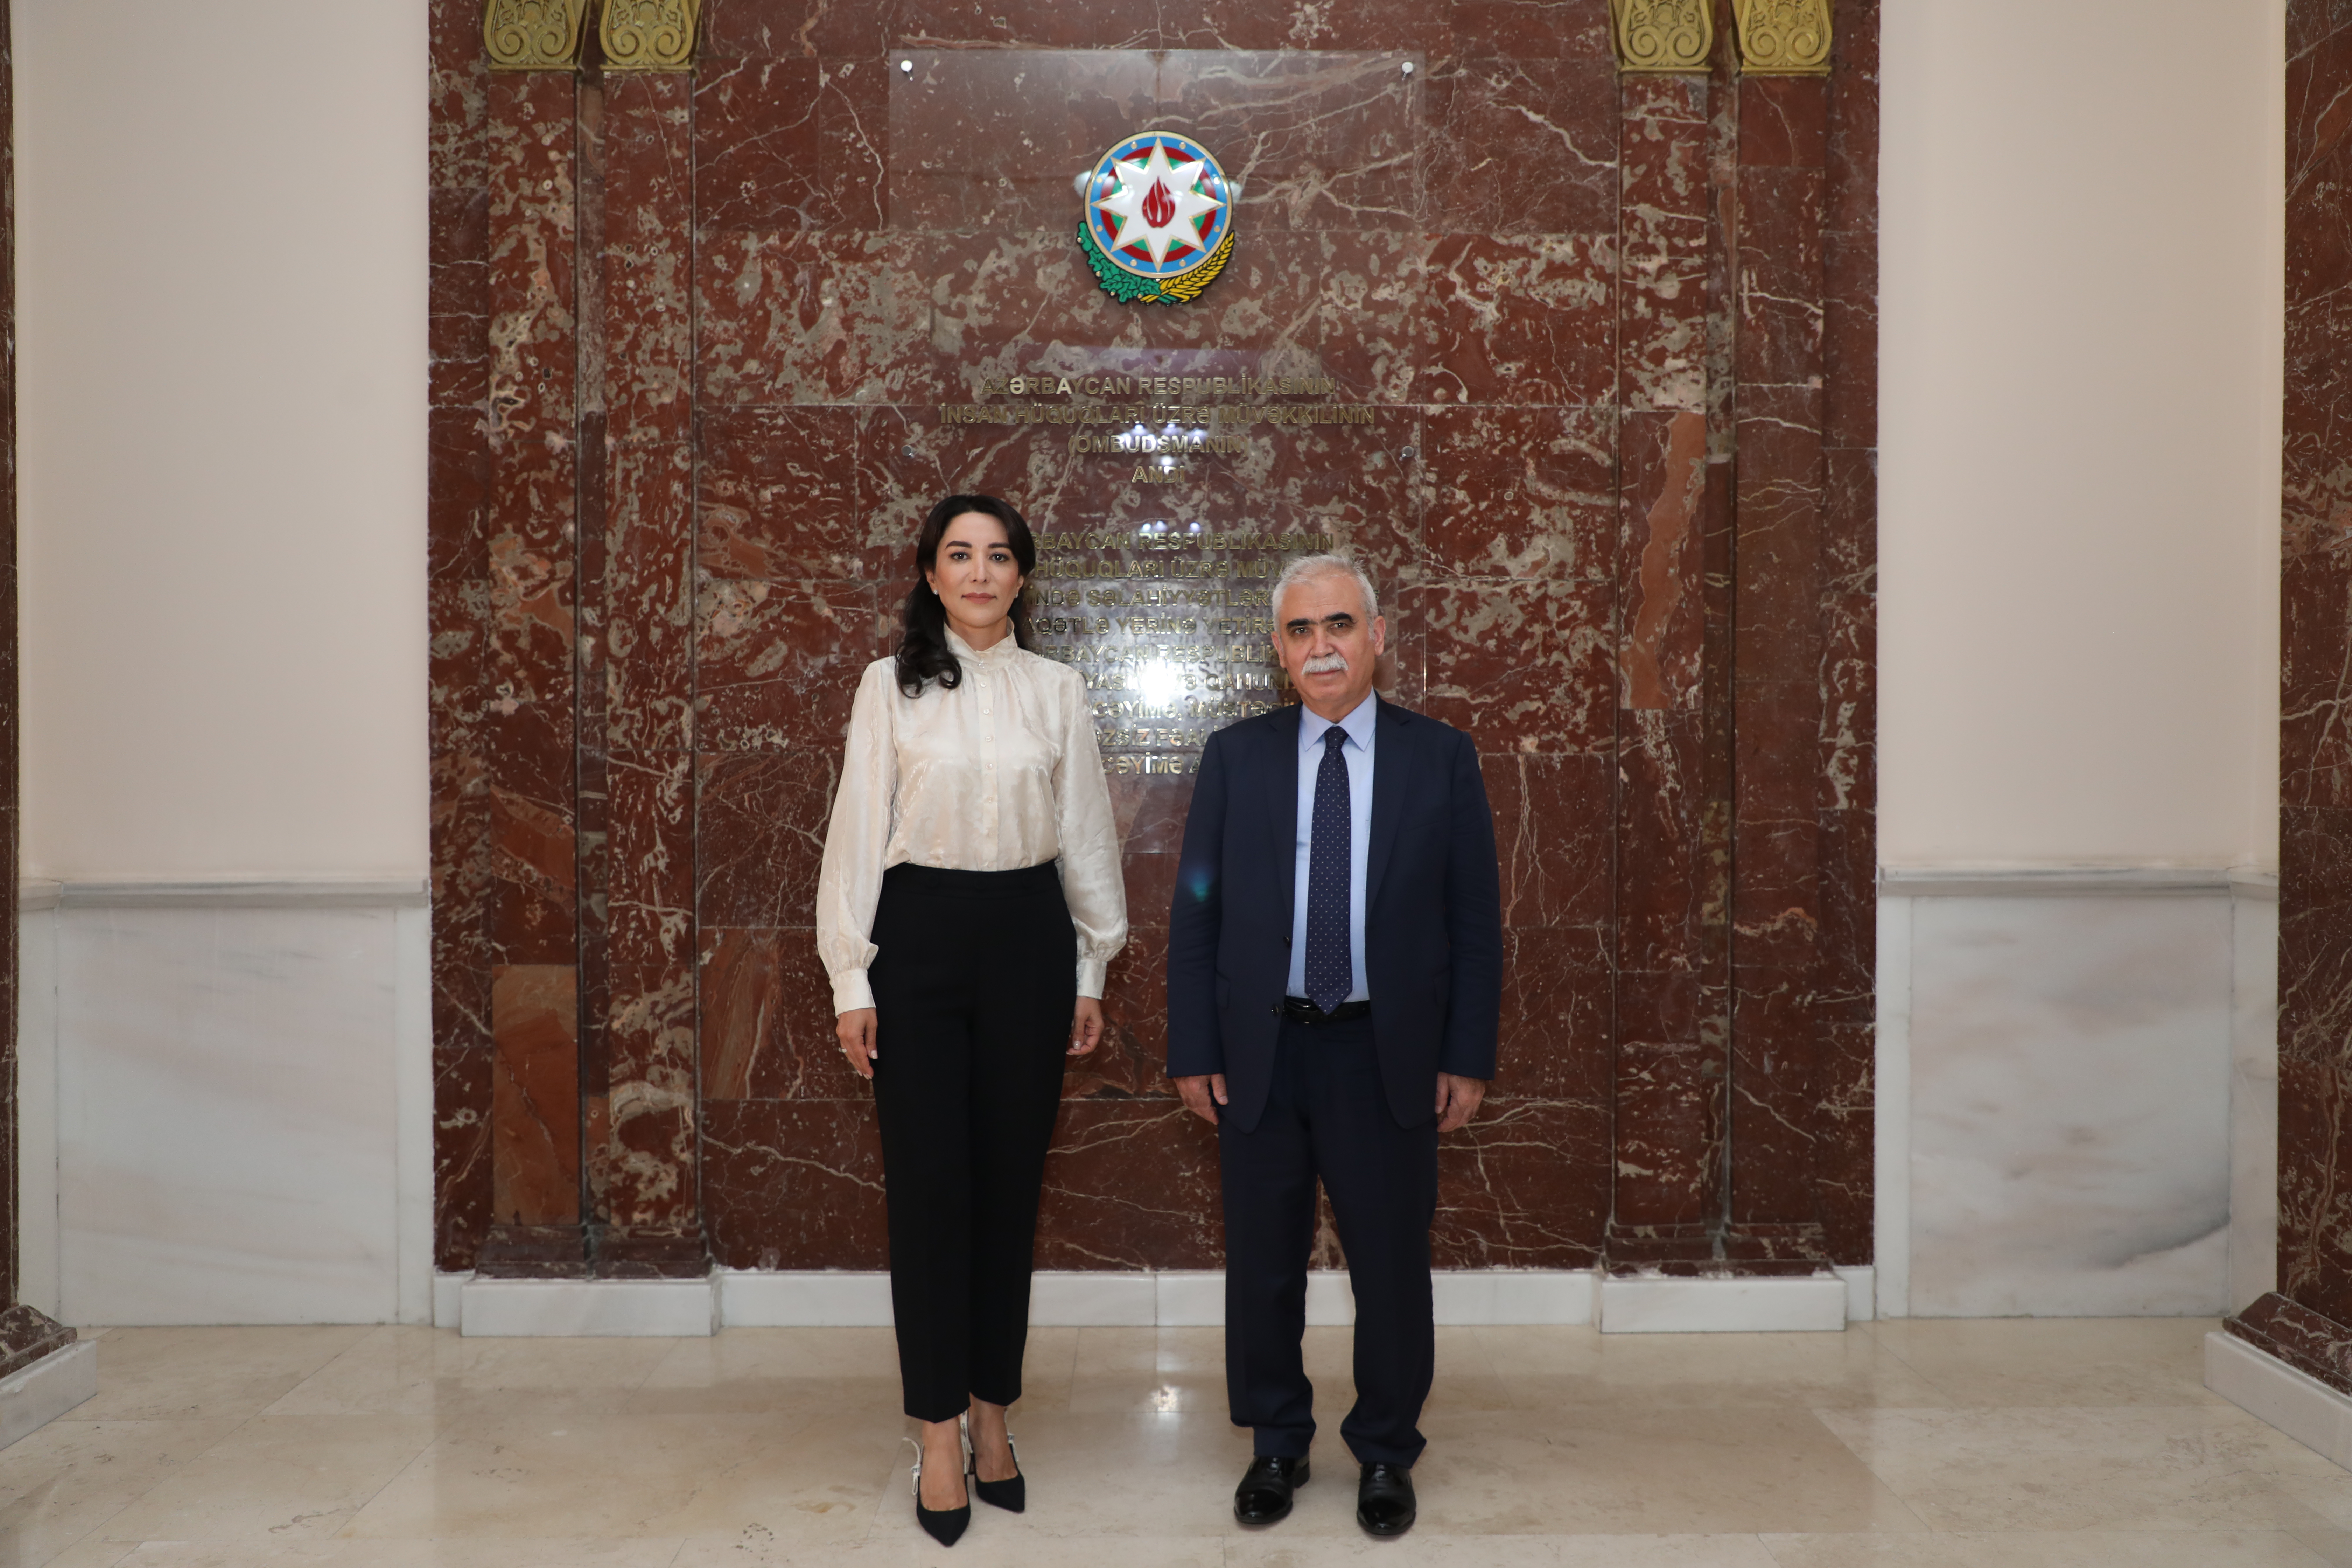 The Ombudsman Sabina Aliyeva held a meeting with the President of the Constitutional Court of Türkiye